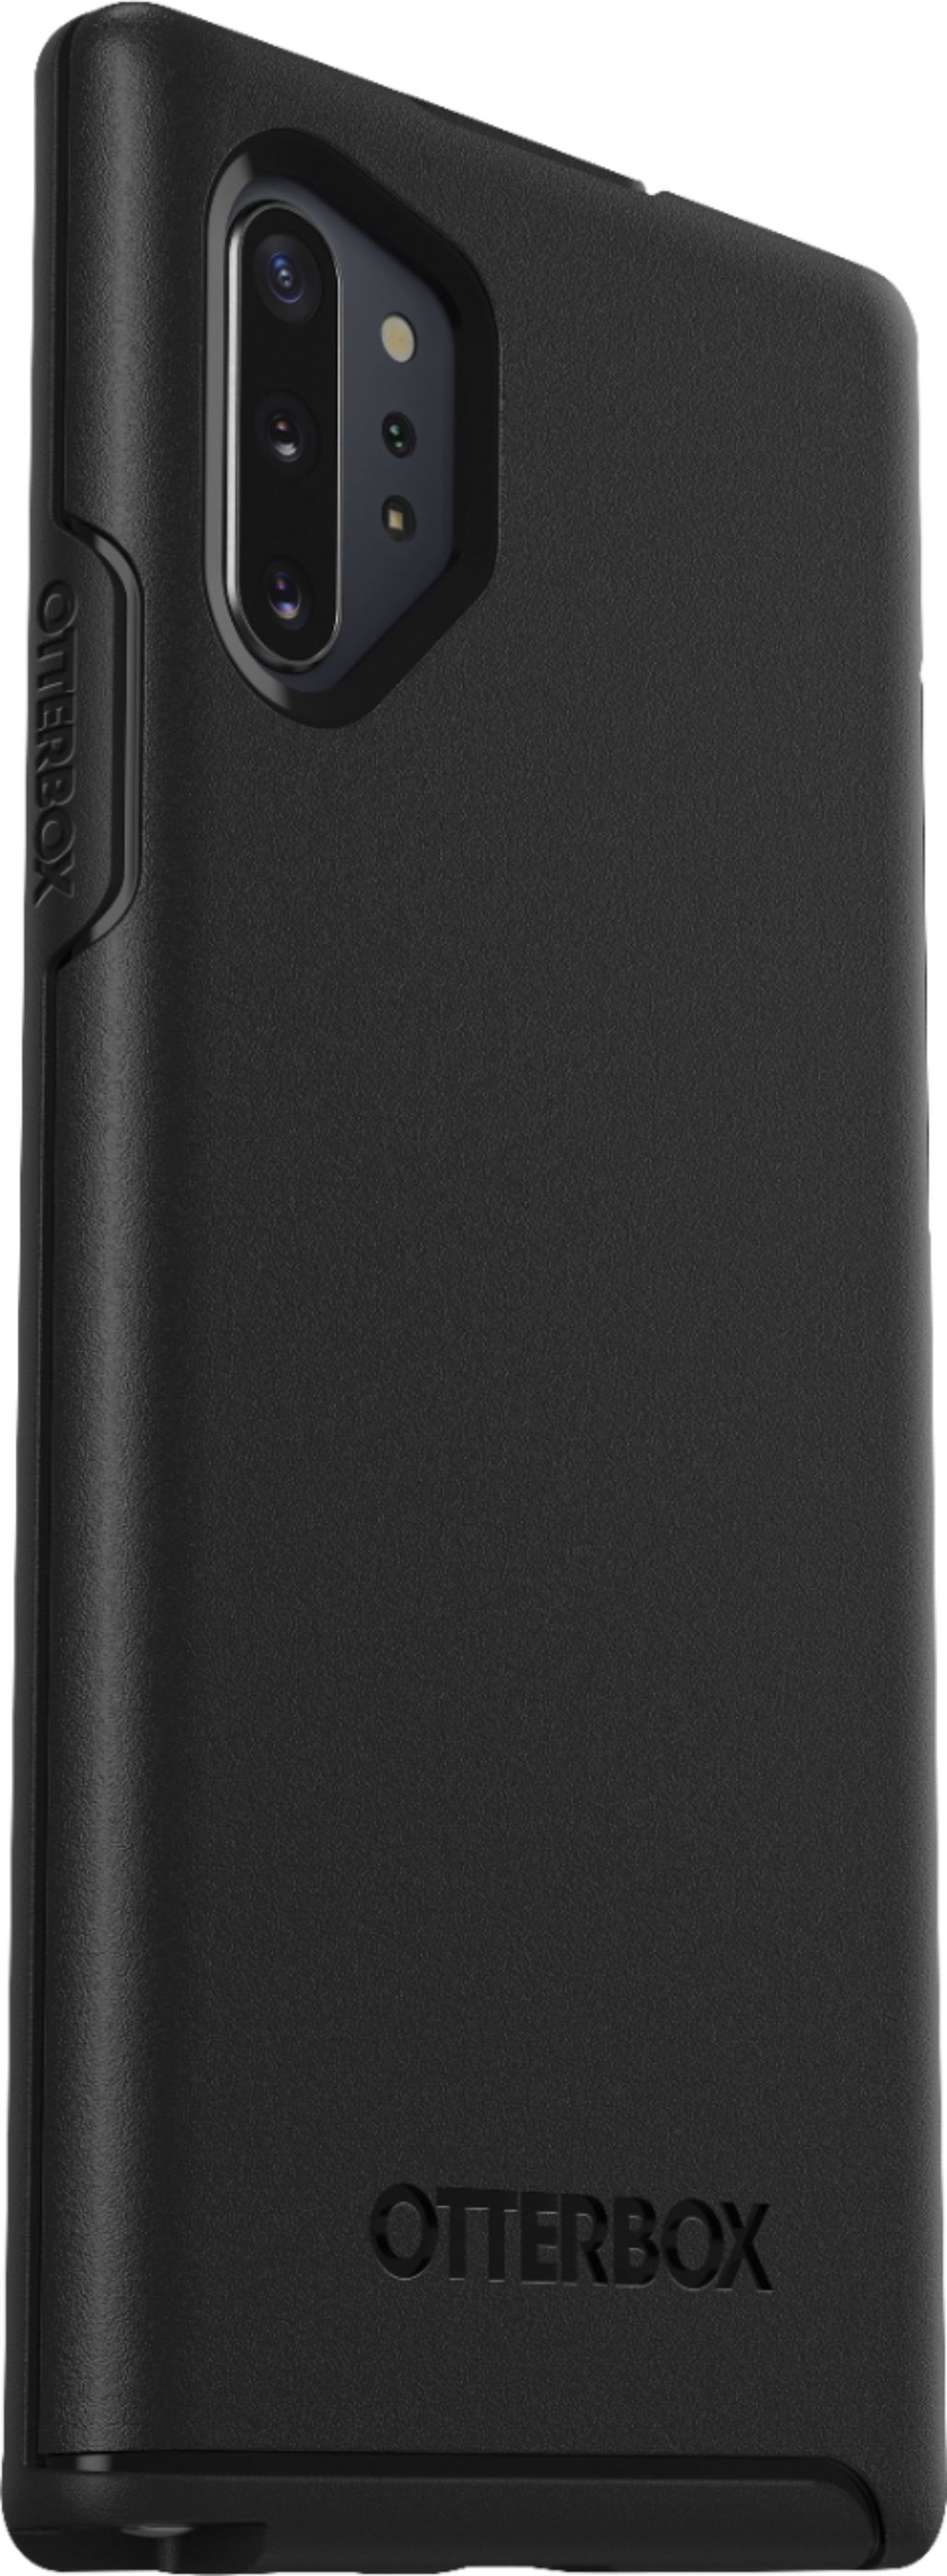 Angle View: OtterBox - Symmetry Series Case for Samsung Galaxy Note10+ and Note10+ 5G - Black